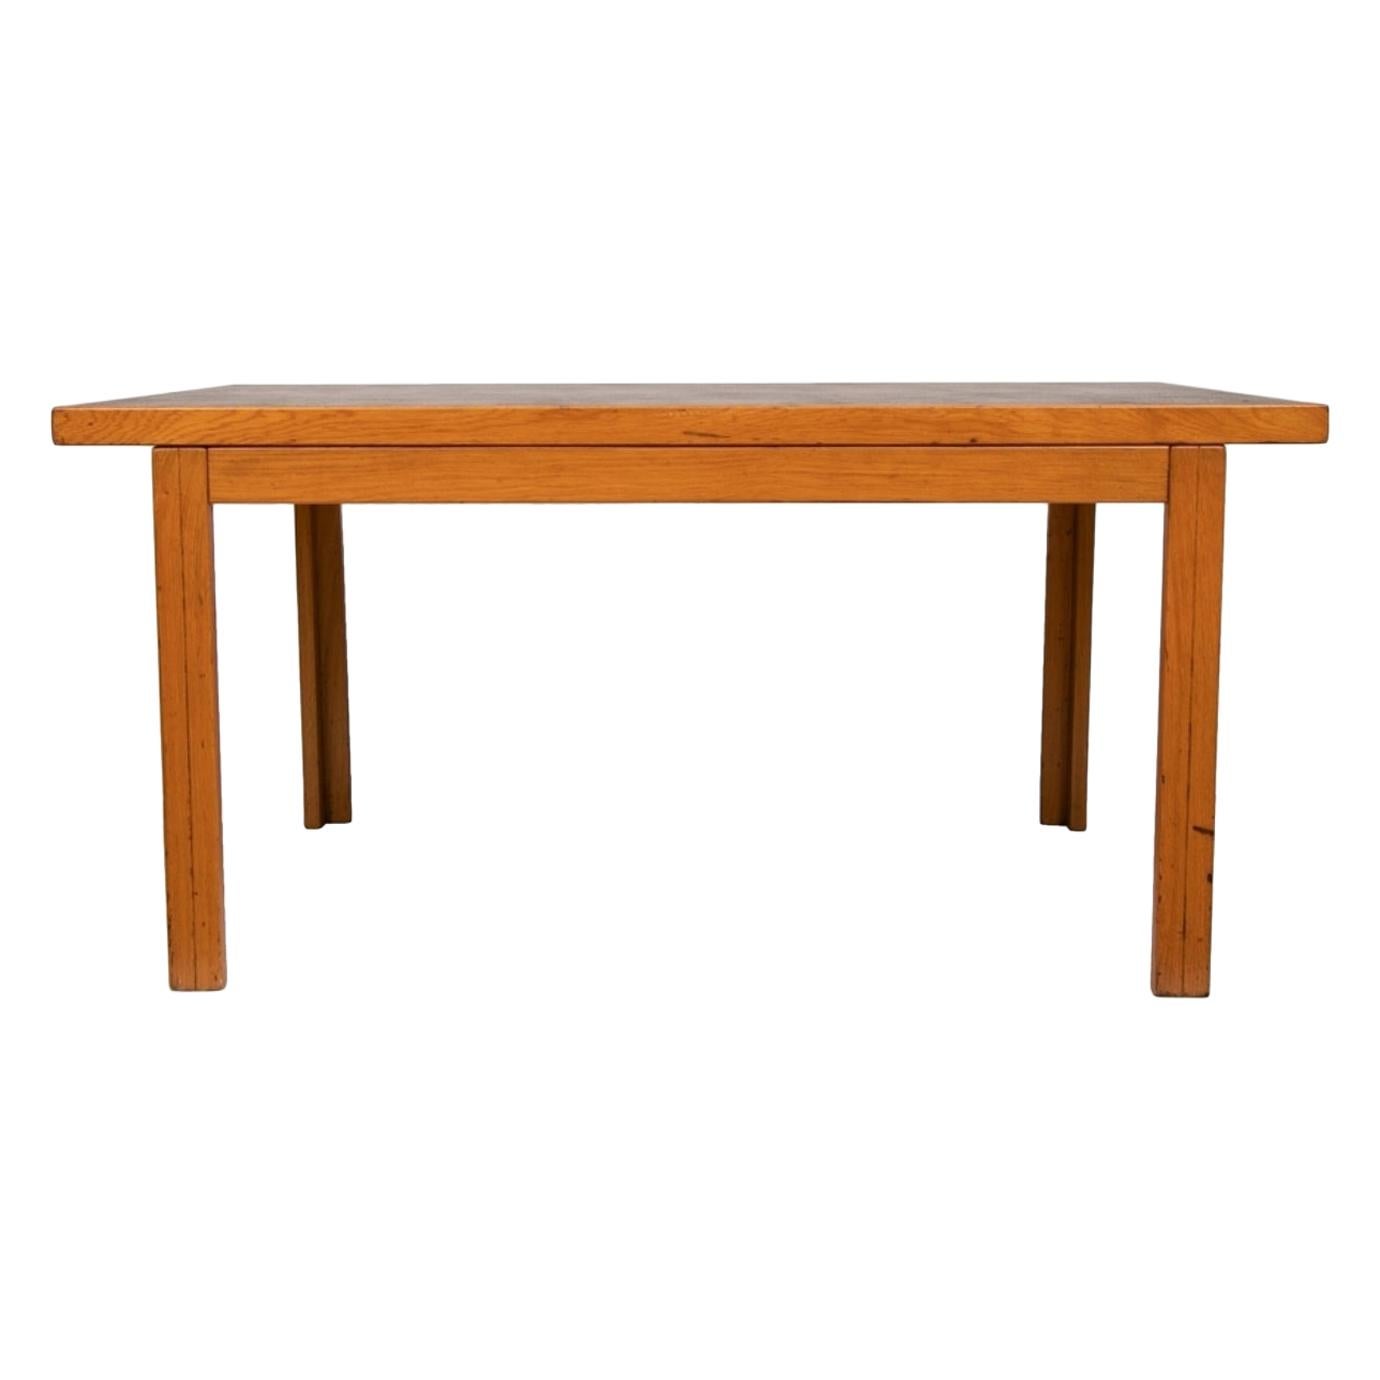 Midcentury Oak Frame Table by Moss Partners For Sale